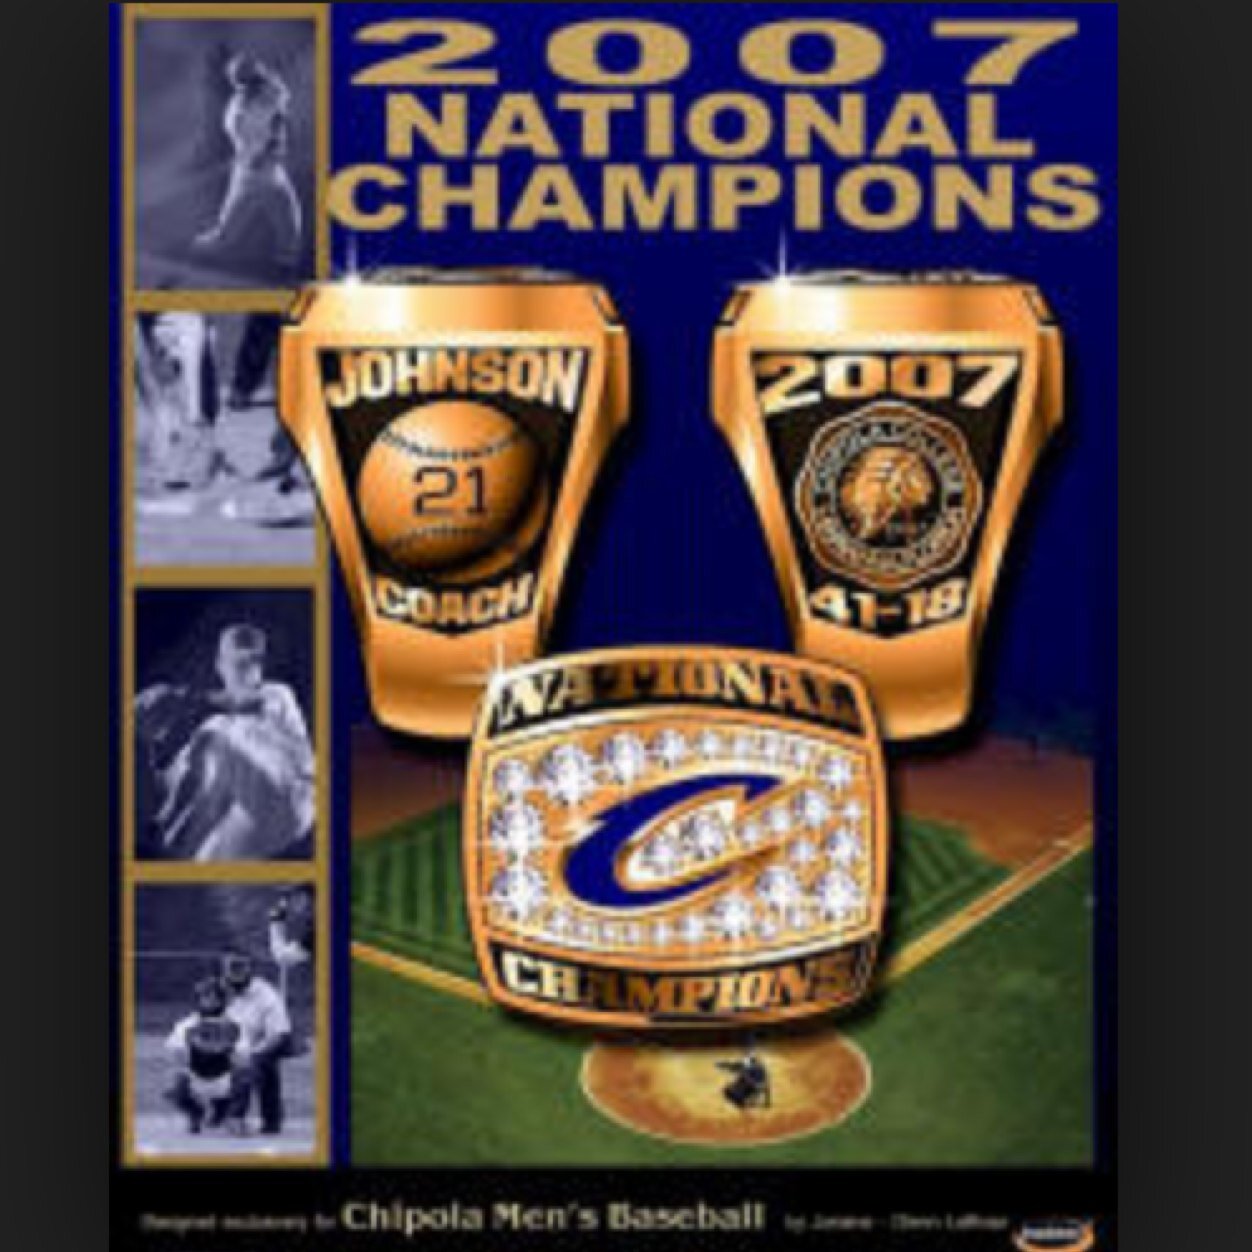 2007 National Champions 
4 Time State/Region Champions: 
1983 2007 2008 2011